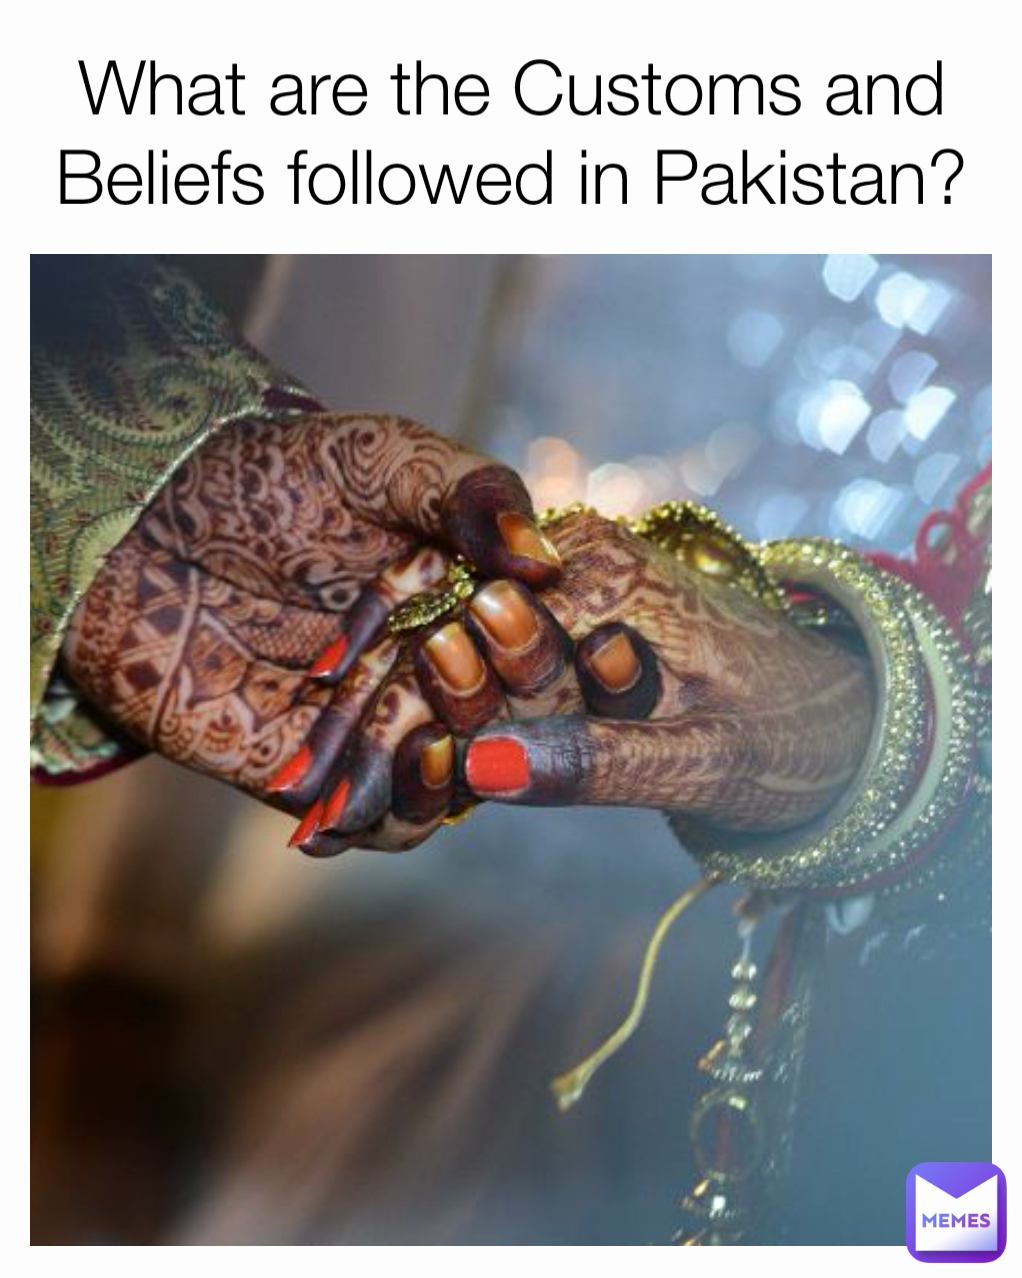 What are the Customs and Beliefs followed in Pakistan?